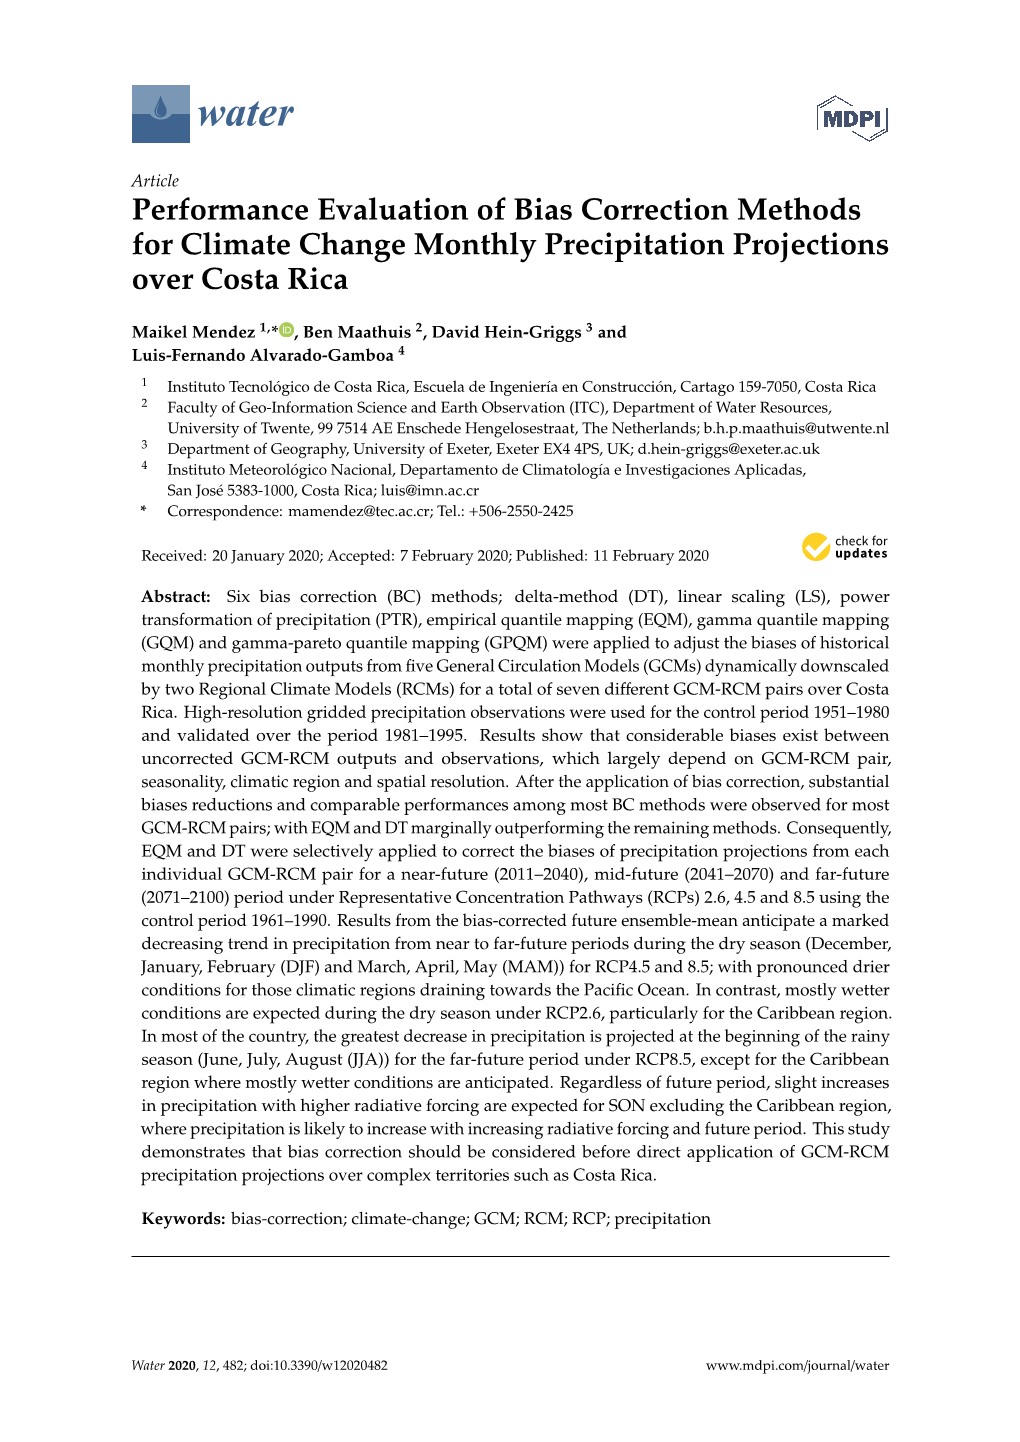 Performance Evaluation of Bias Correction Methods for Climate Change Monthly Precipitation Projections Over Costa Rica